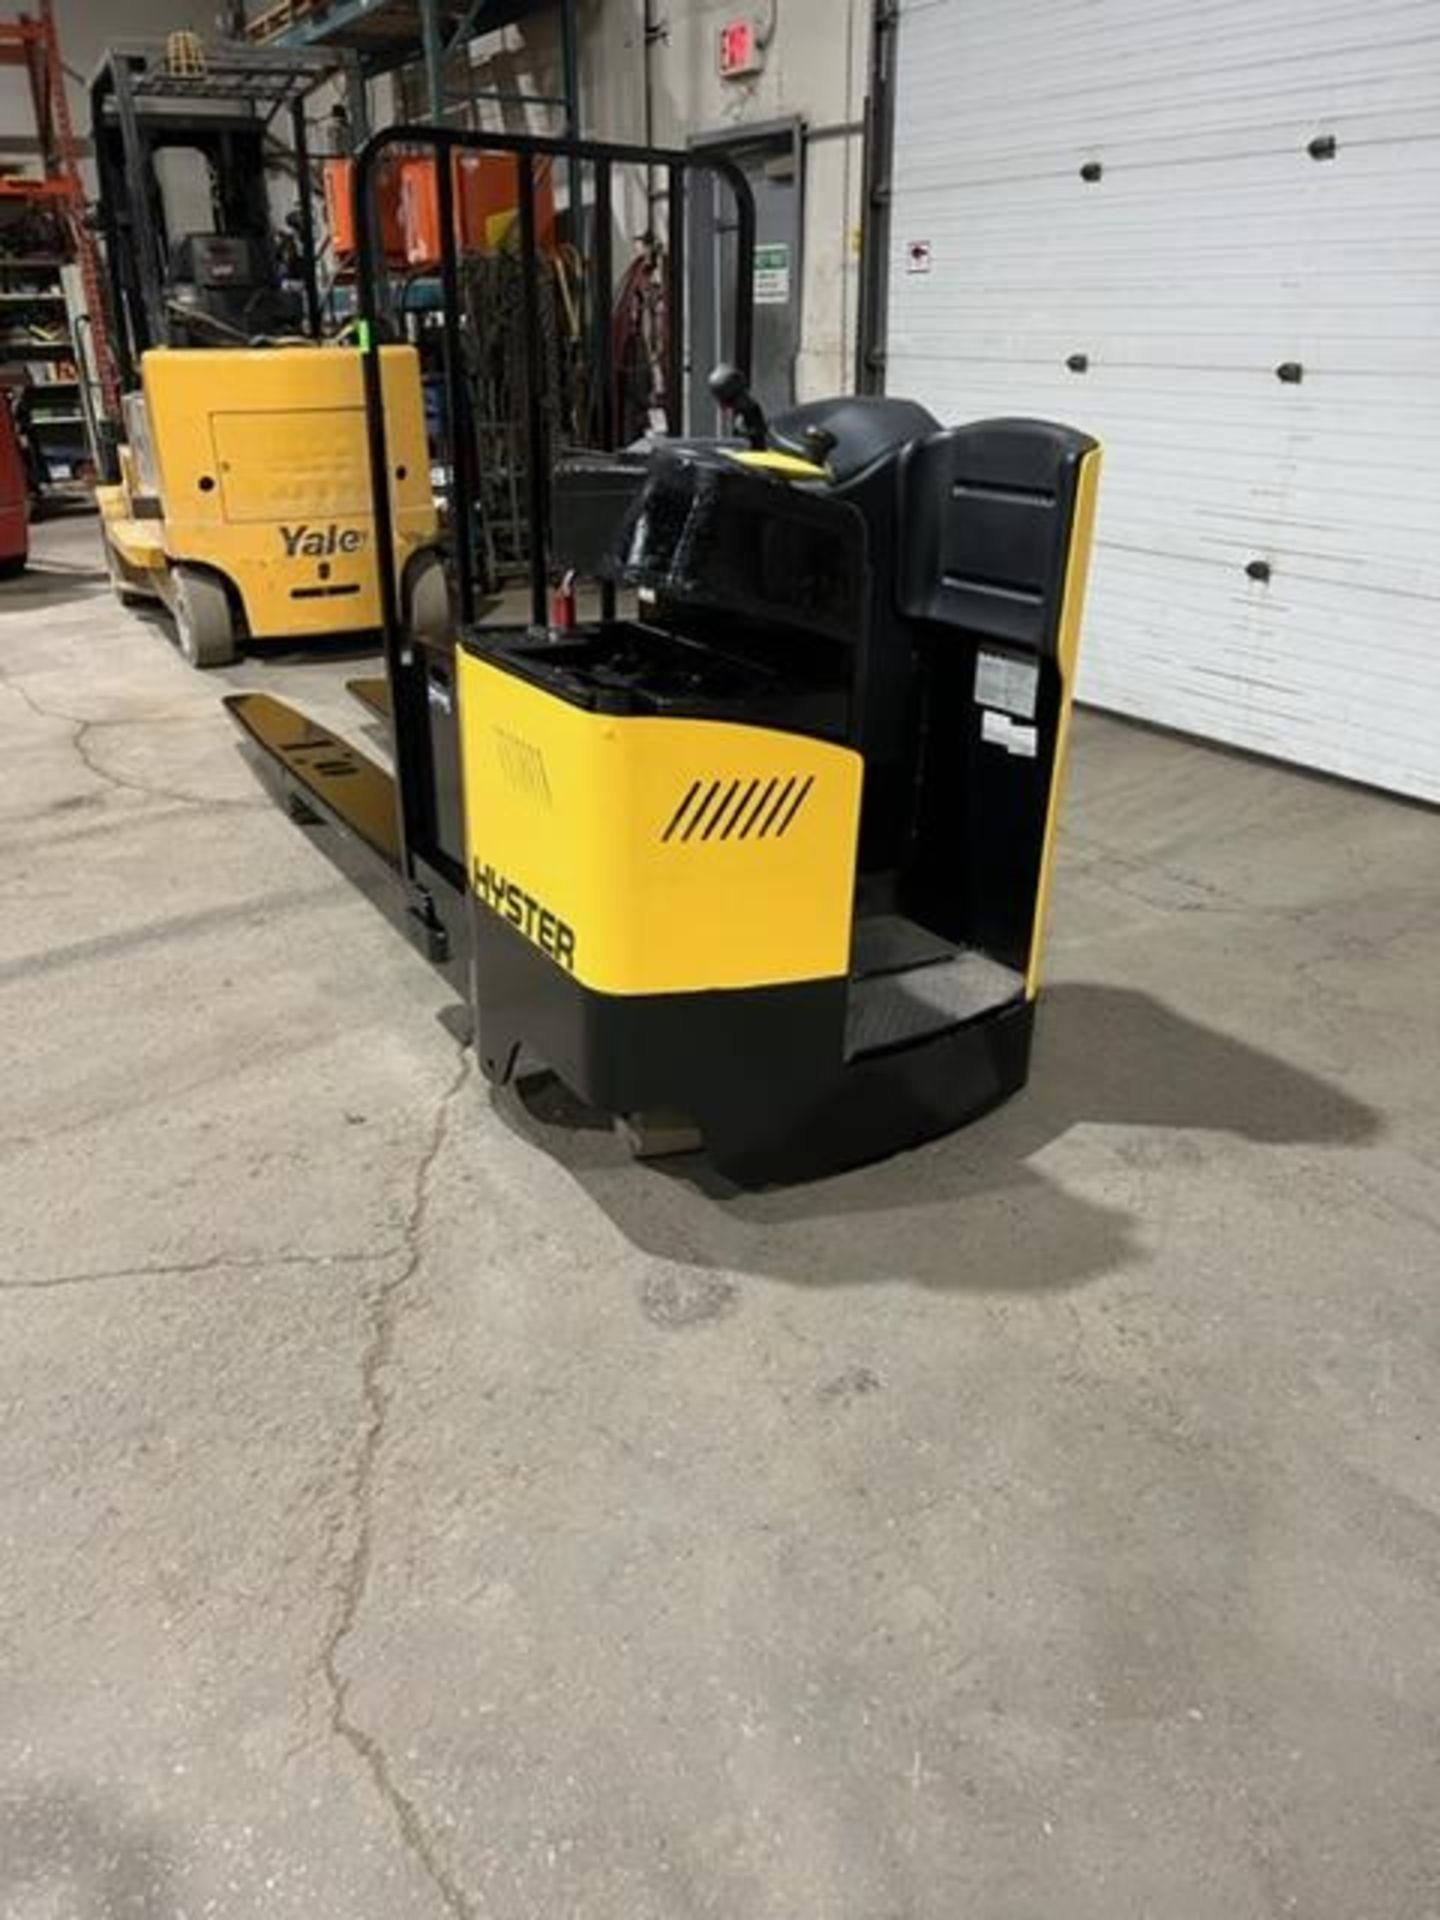 NICE 2015 Hyster Ride-On END RIDER Powered Pallet Truck 8' Long Forks 8000lbs capacity 24V NICE - Image 4 of 4